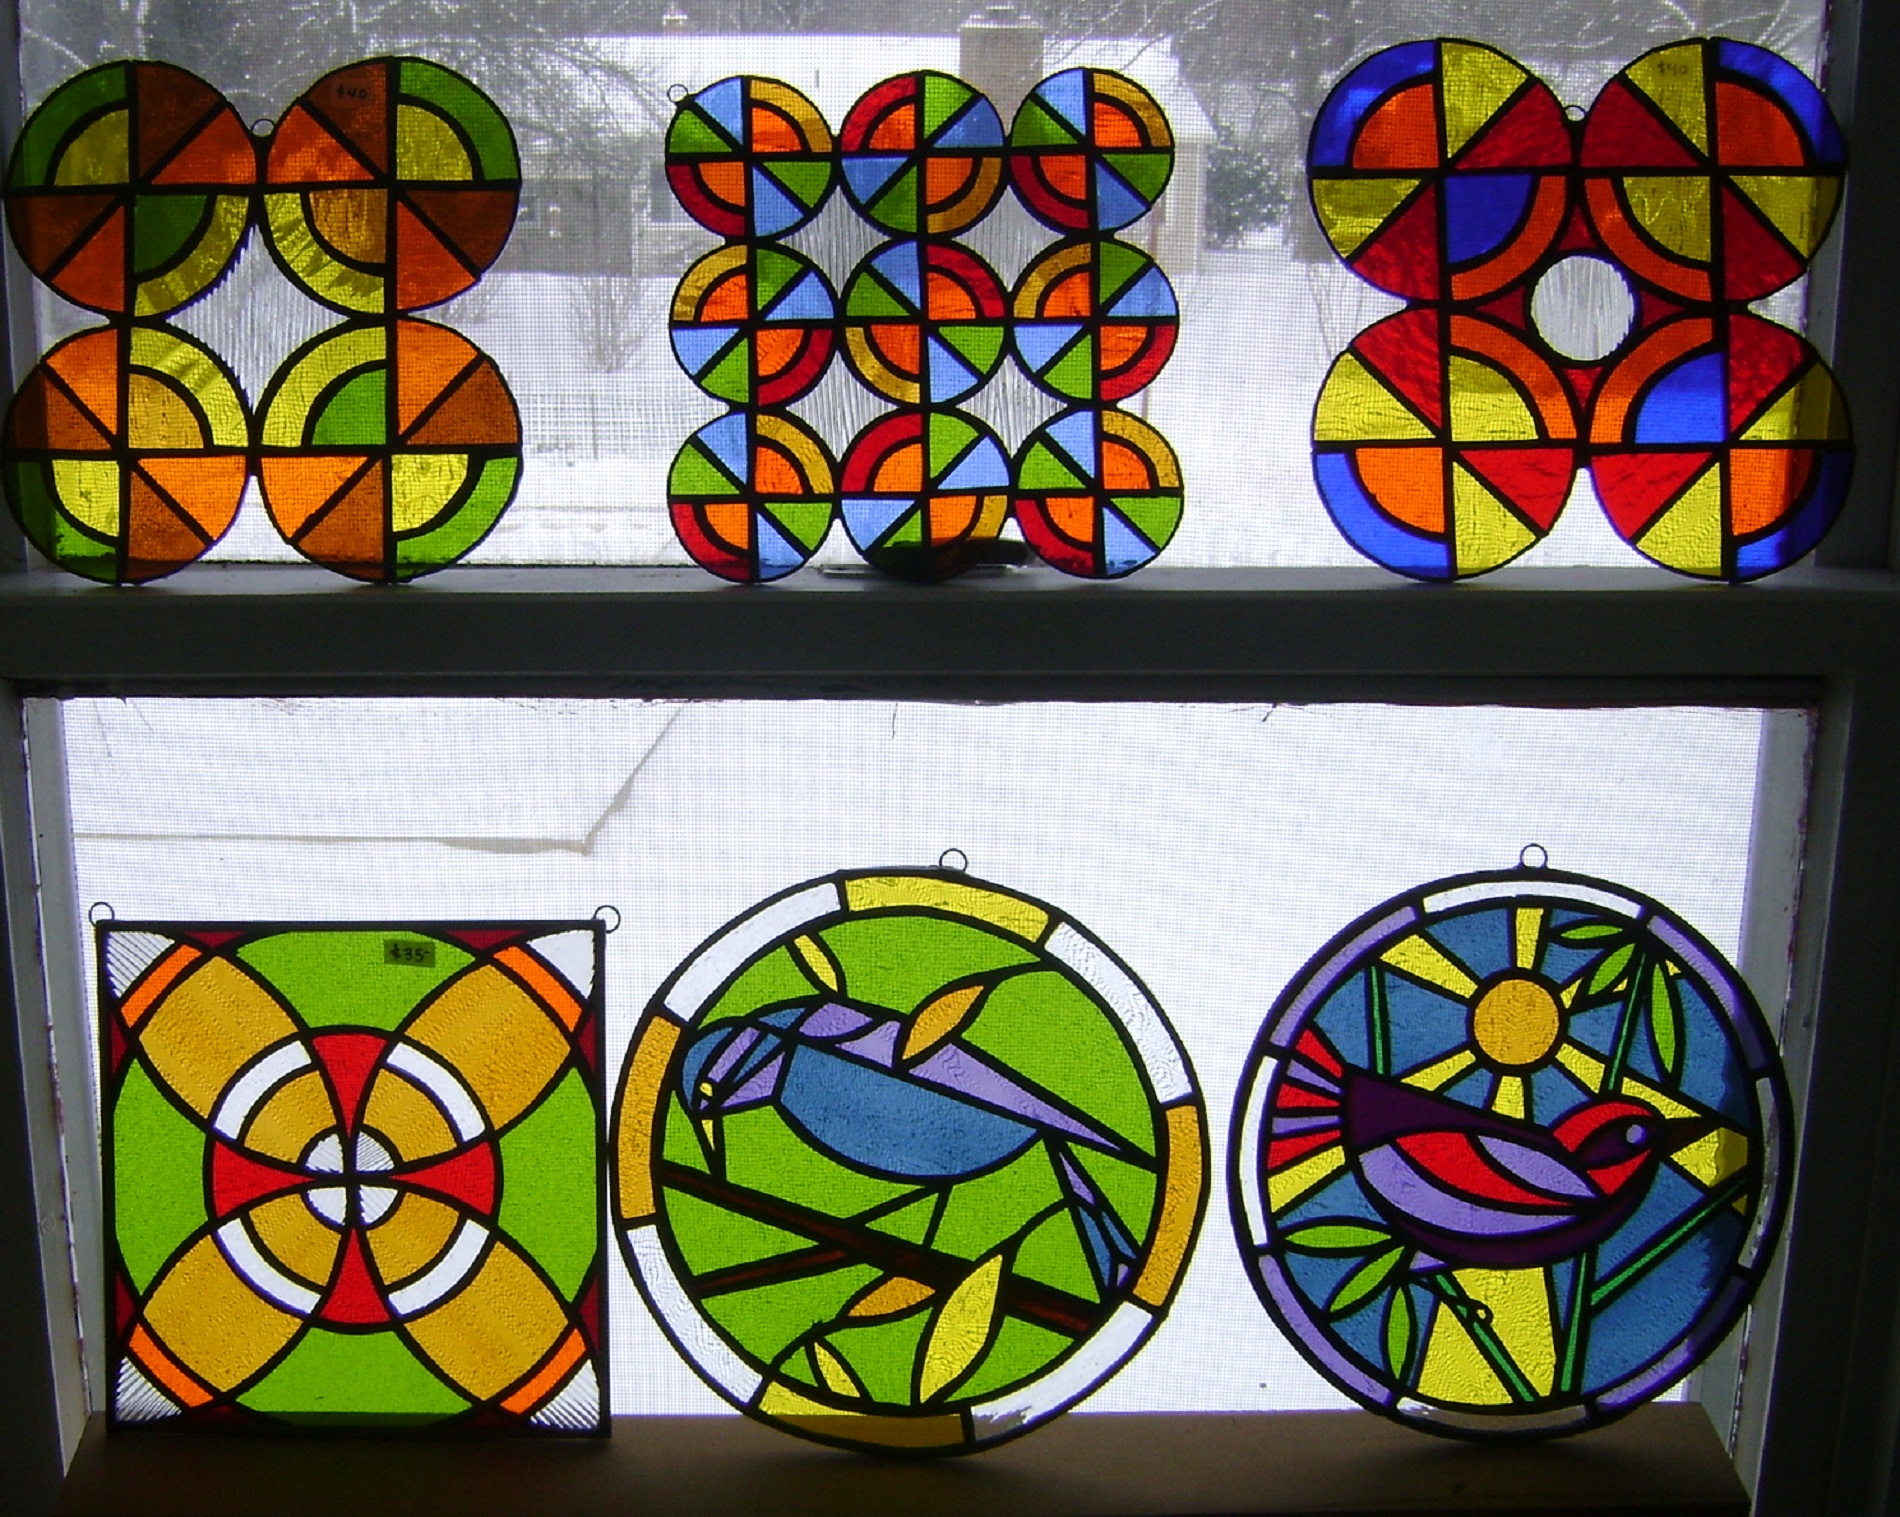 Glass art designs that feature reds, oranges and yellows with designs that are circular or birds and can hang from windows